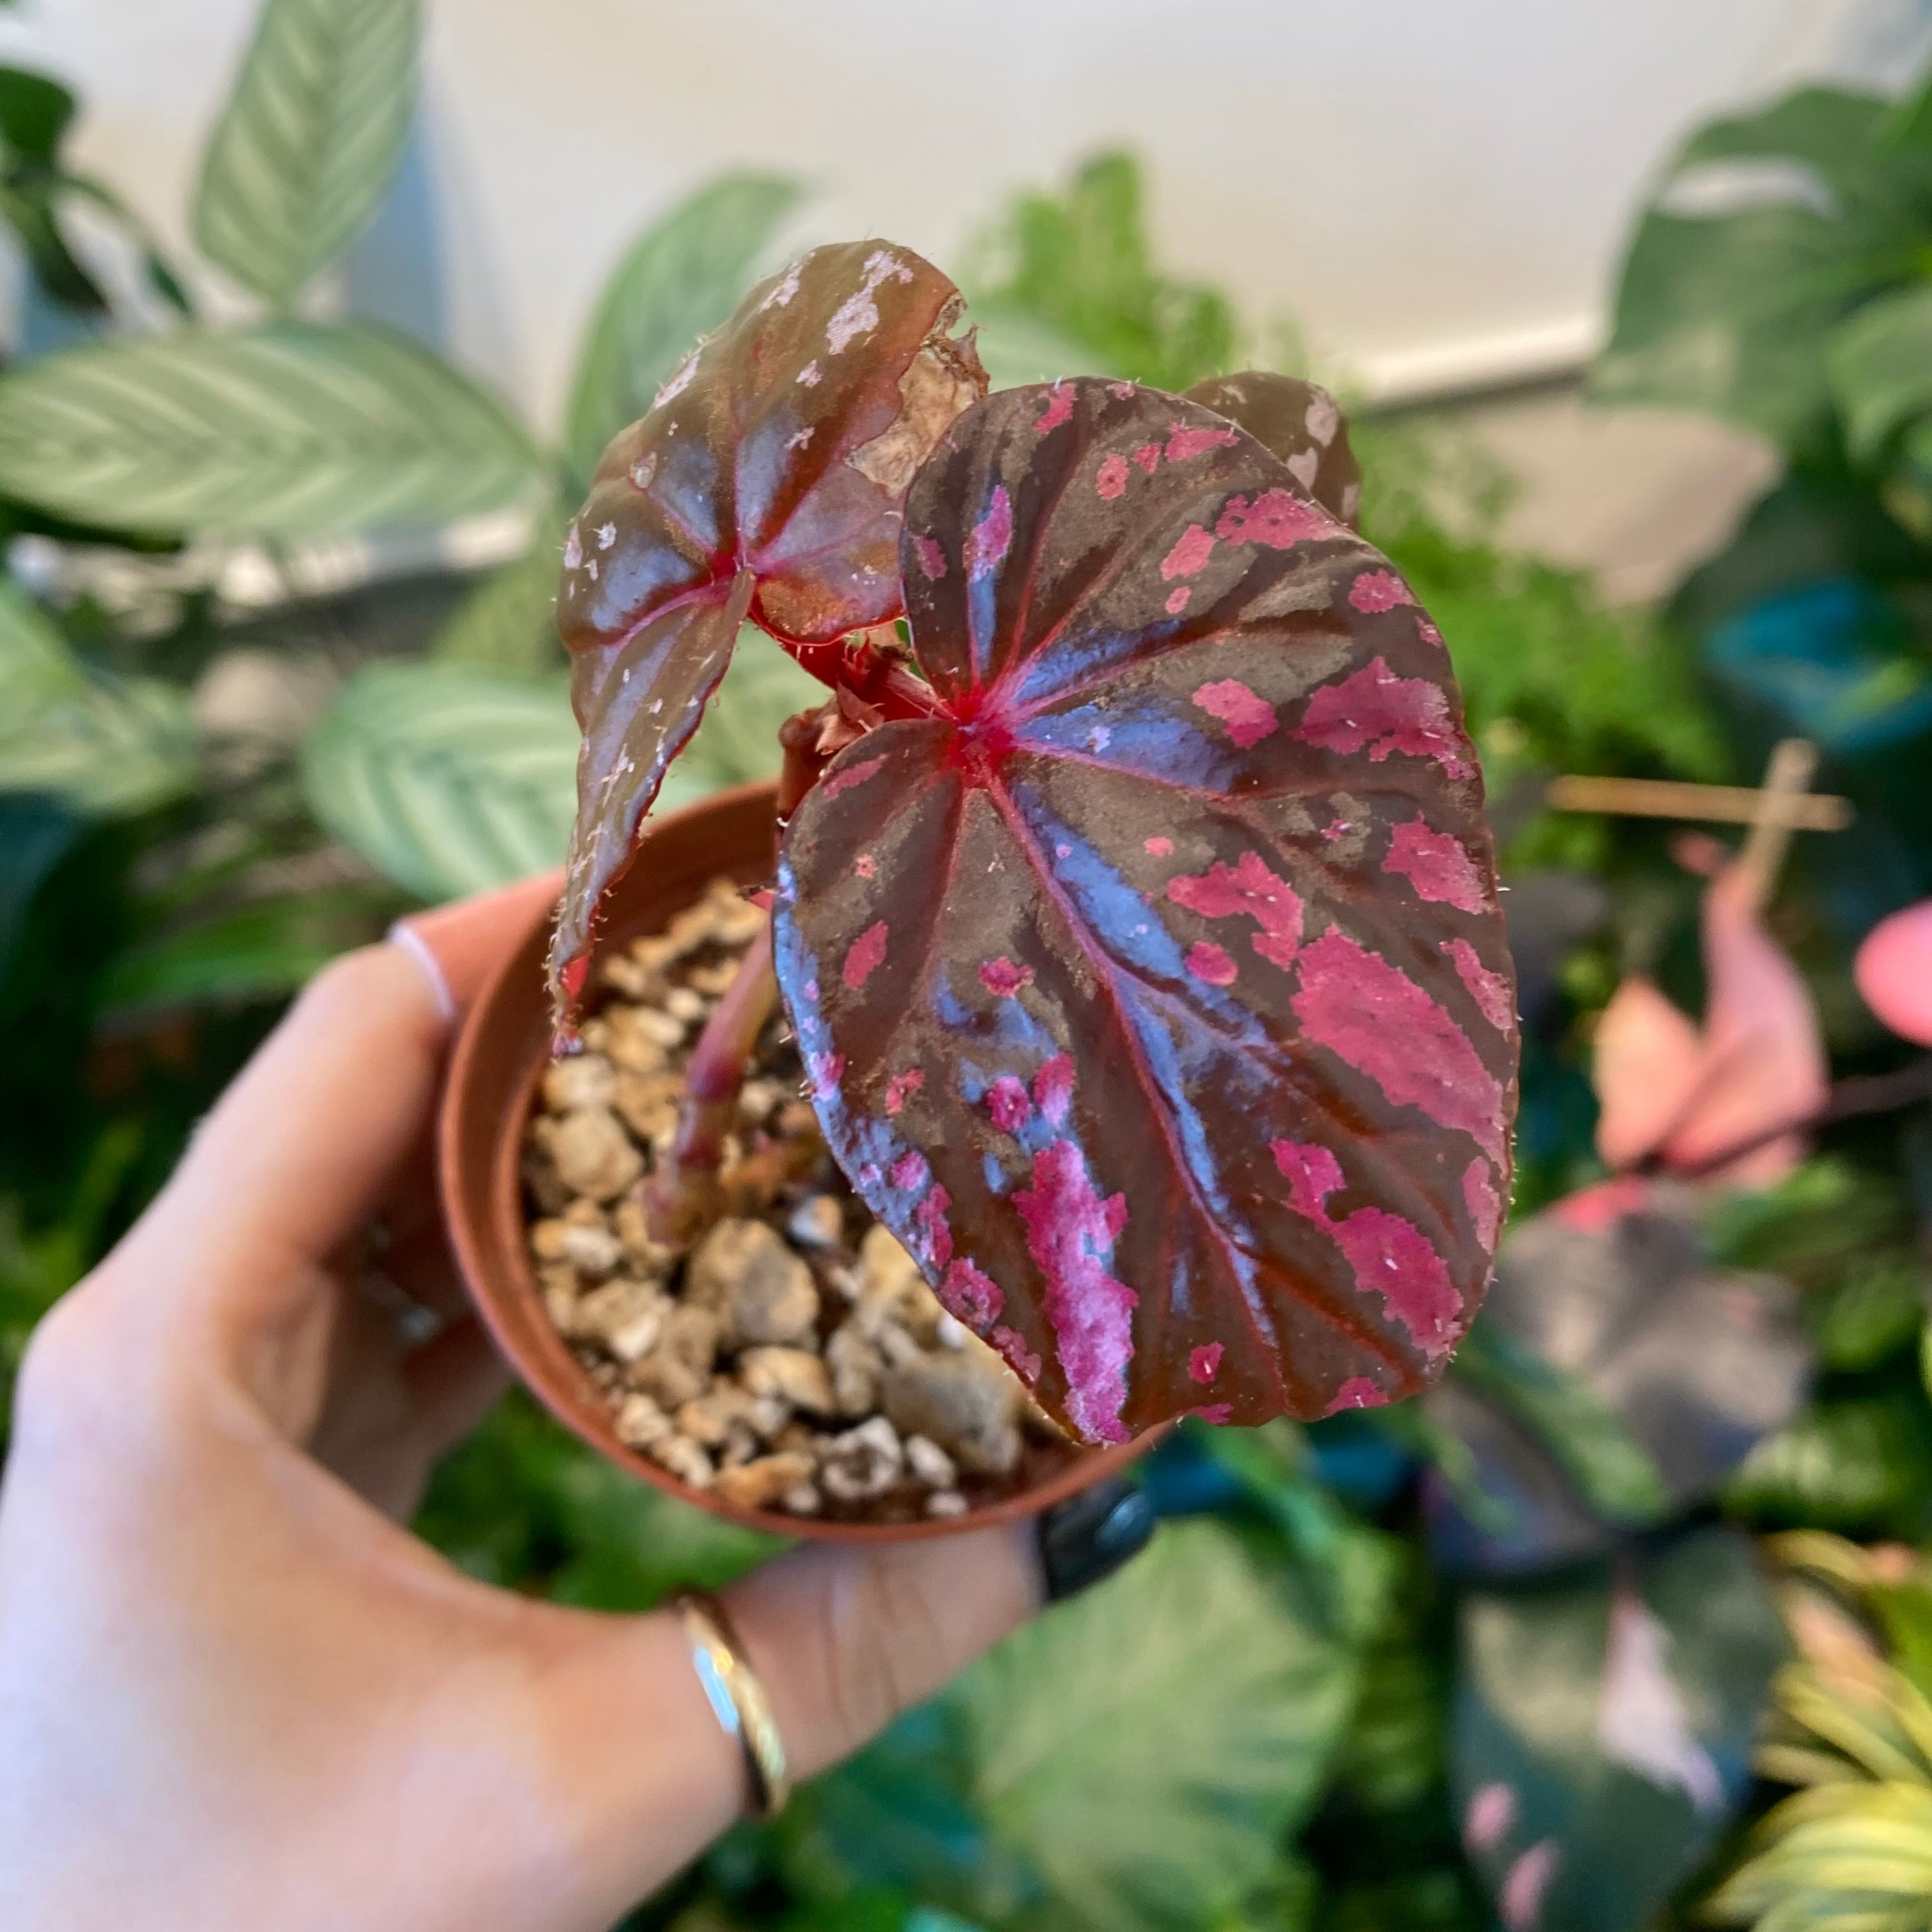 Begonia brevirimosa subsp. exotica – The Plant Lady SF